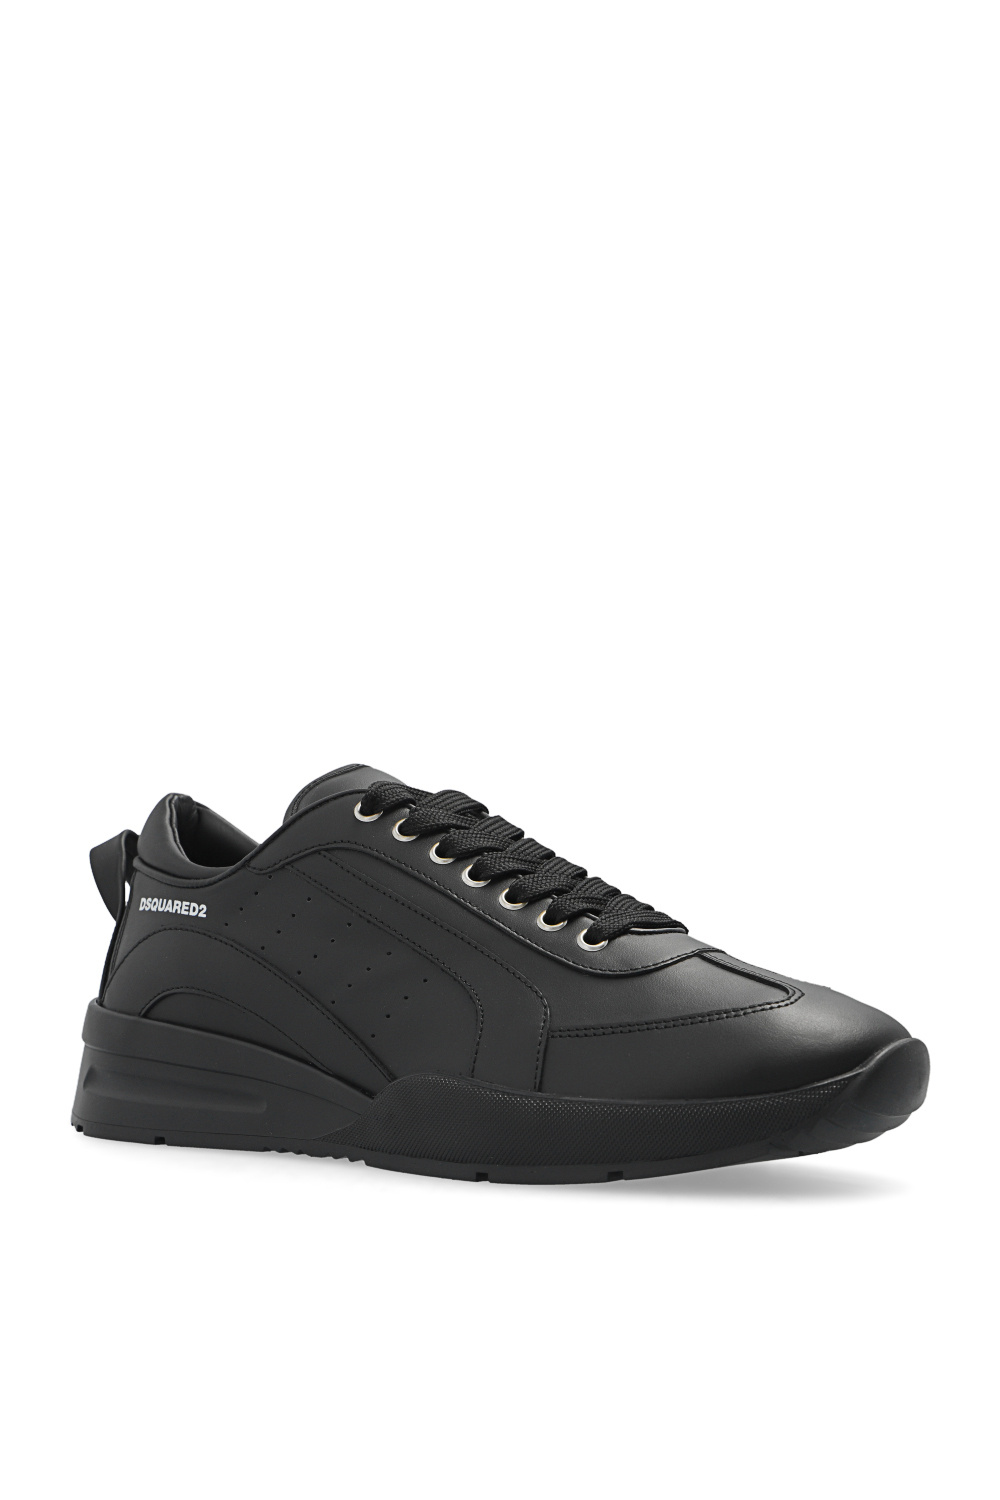 Dsquared2 ‘Legend’ sneakers